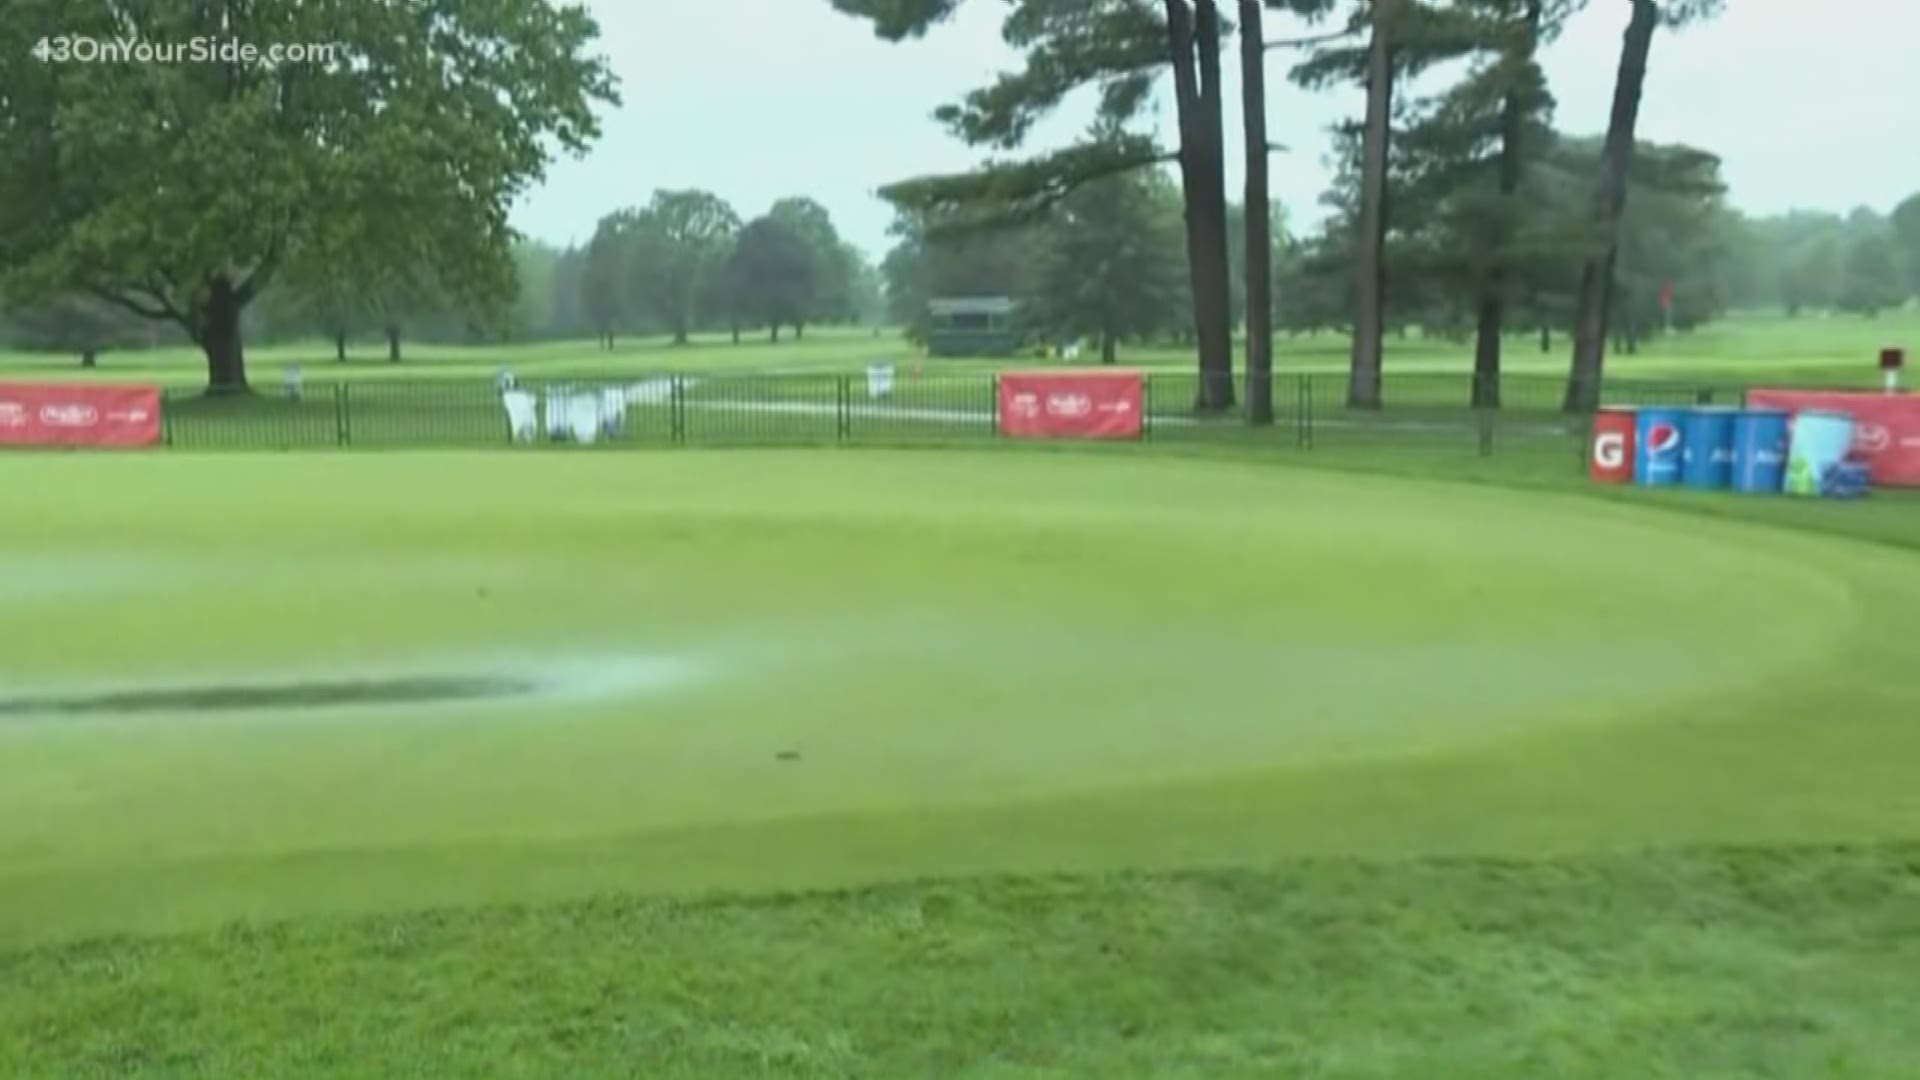 The first round of the tournament is set to kick off Thursday morning. Gates were set to open at 7 a.m., but due to rain officials have delayed the day until 8:45 a.m. The earliest possible start time is 8:45 a.m.